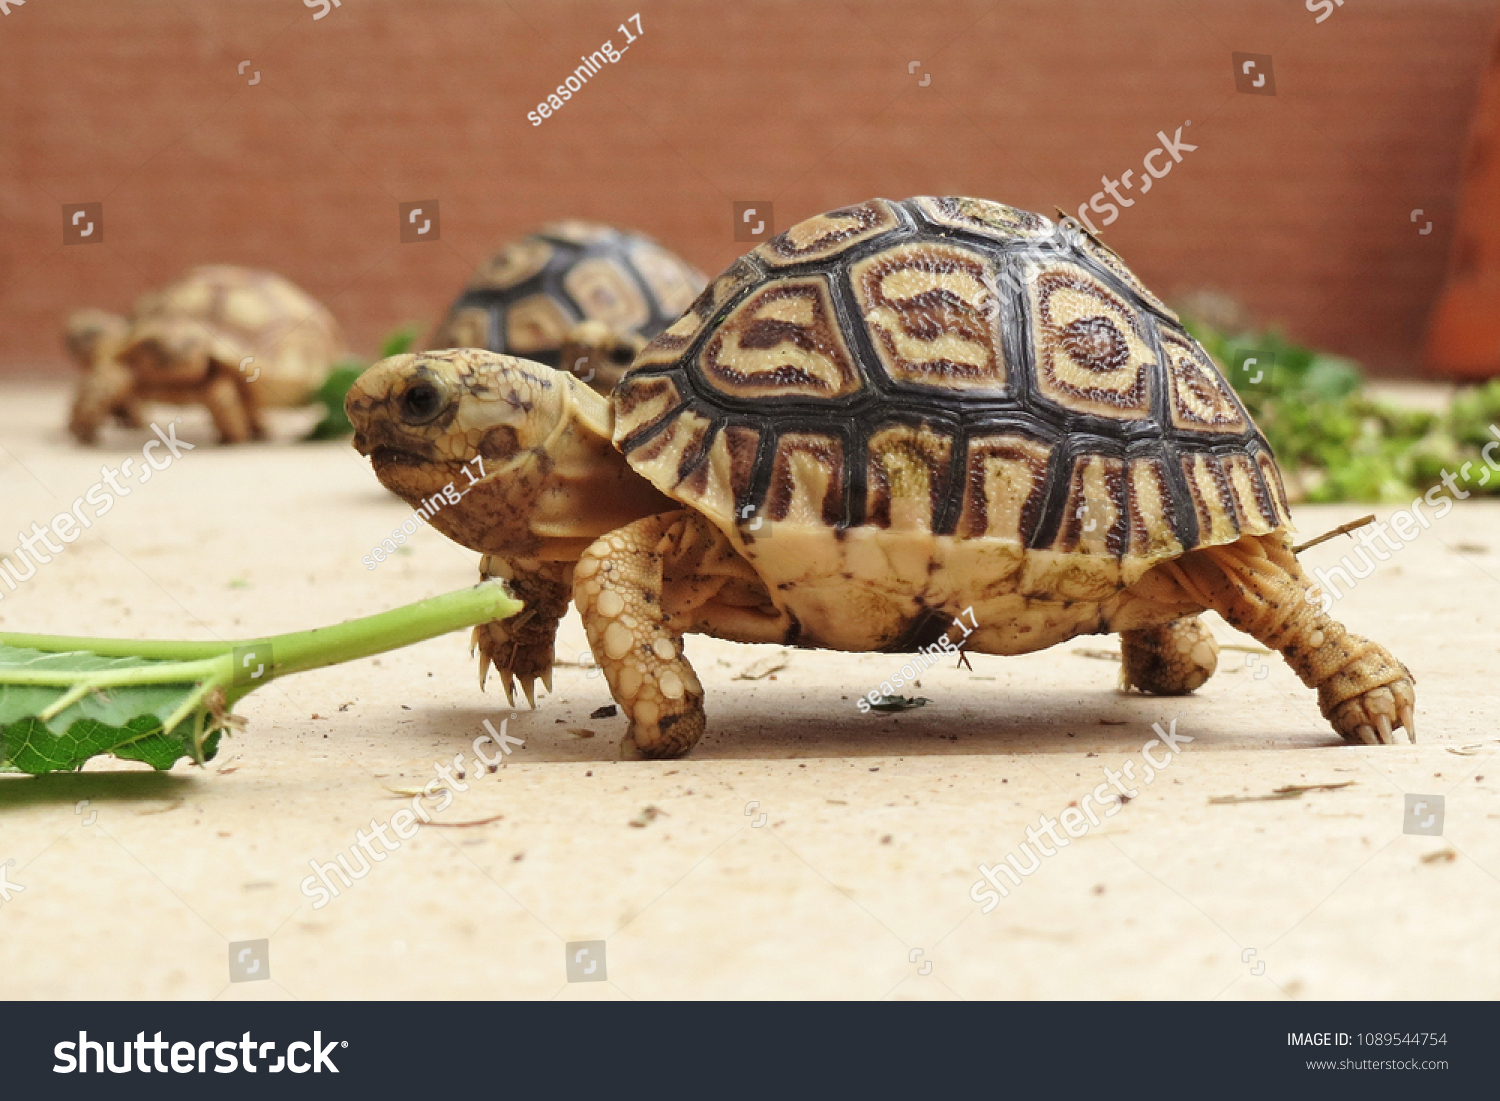 Baby Leopard Tortoise His Protective Shell Stock Photo Edit Now 1089544754,Starbuck Sizes And Prices